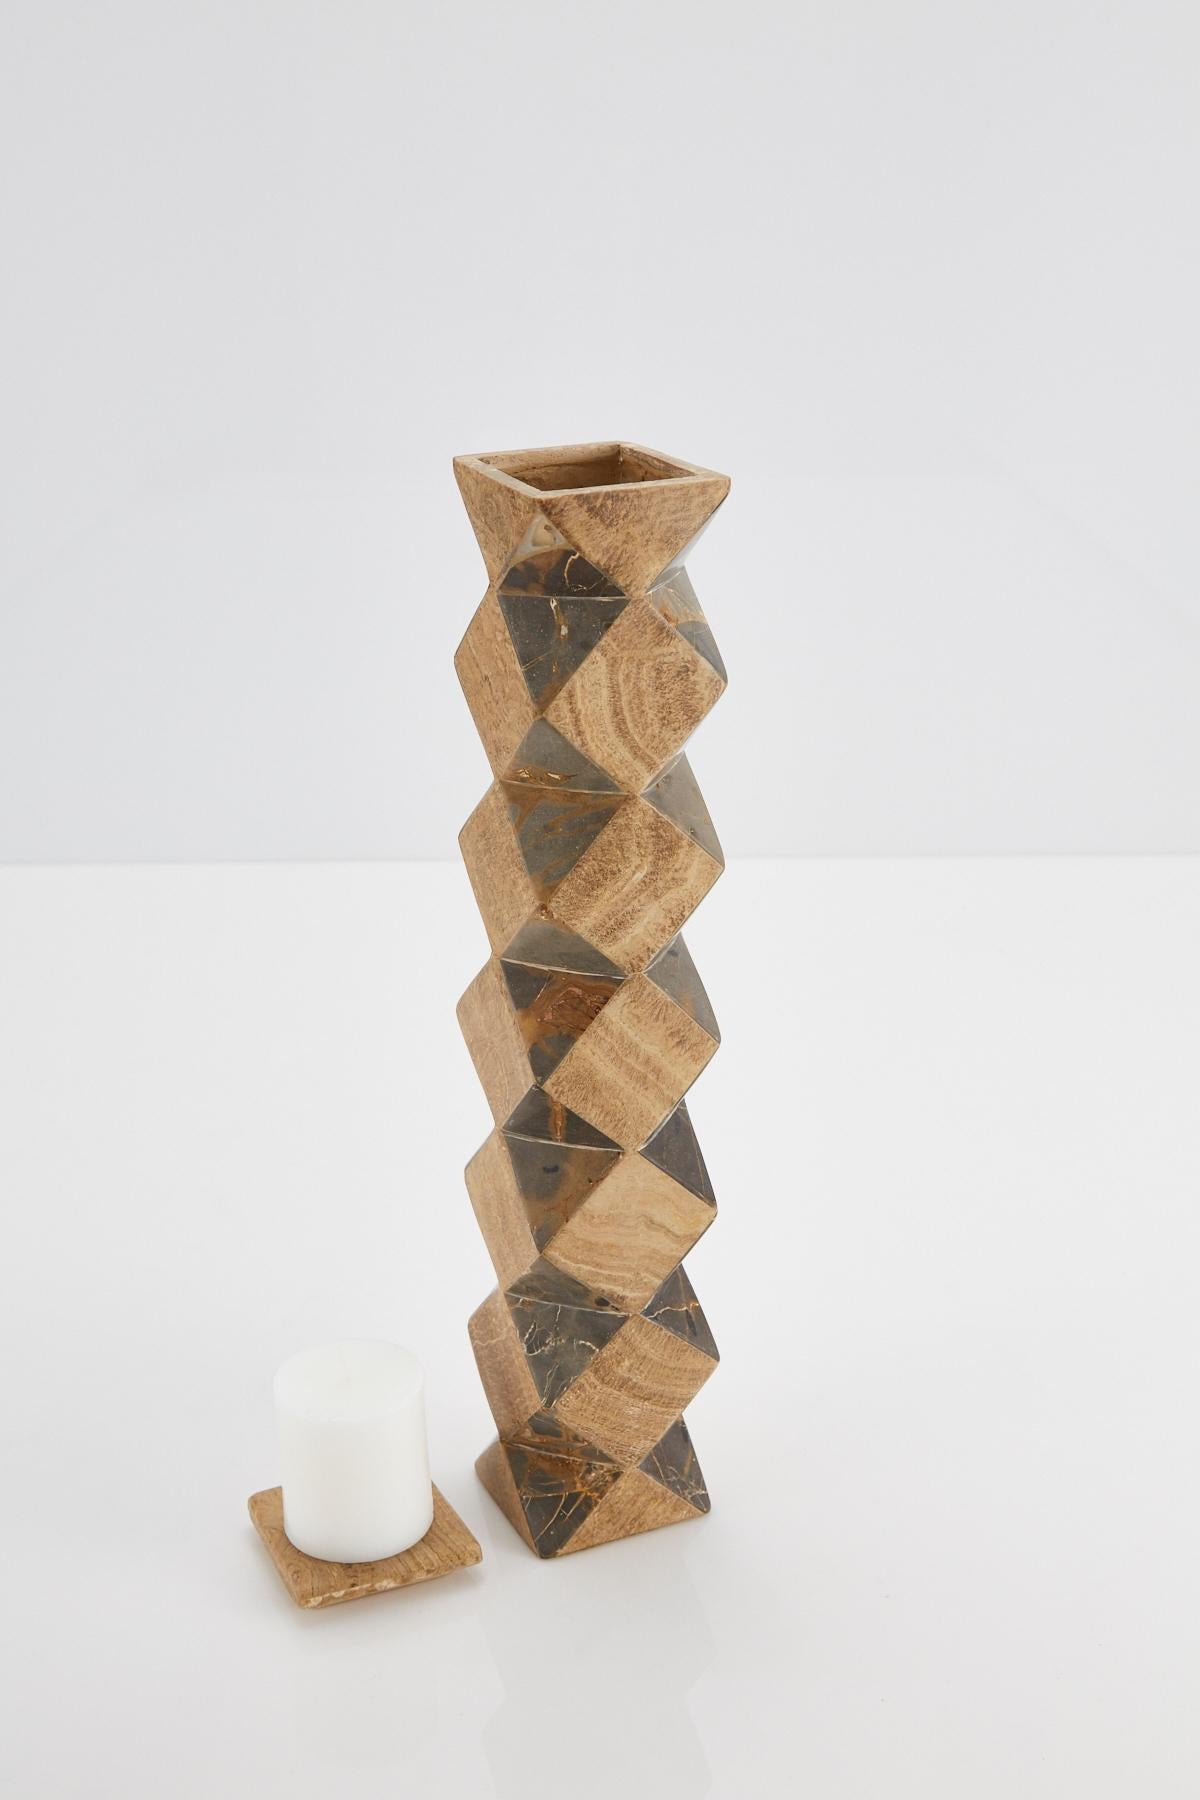 Painted Tall Convertible Faceted Postmodern Tessellated Stone Candlestick or Vase, 1990s For Sale